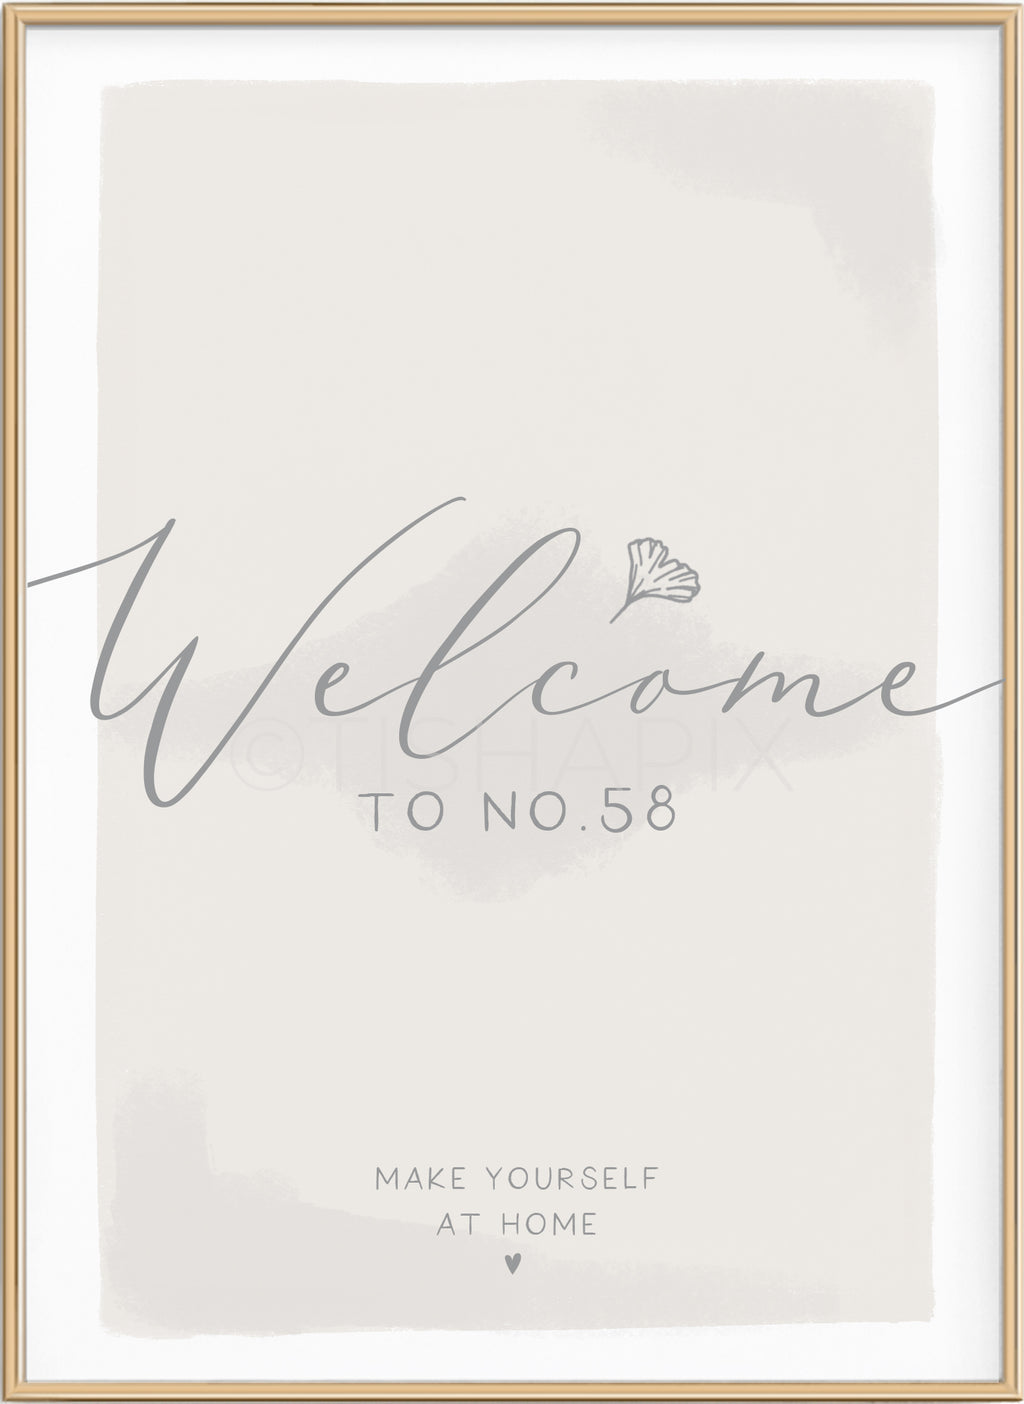 Welcome - Make Yourself At Home